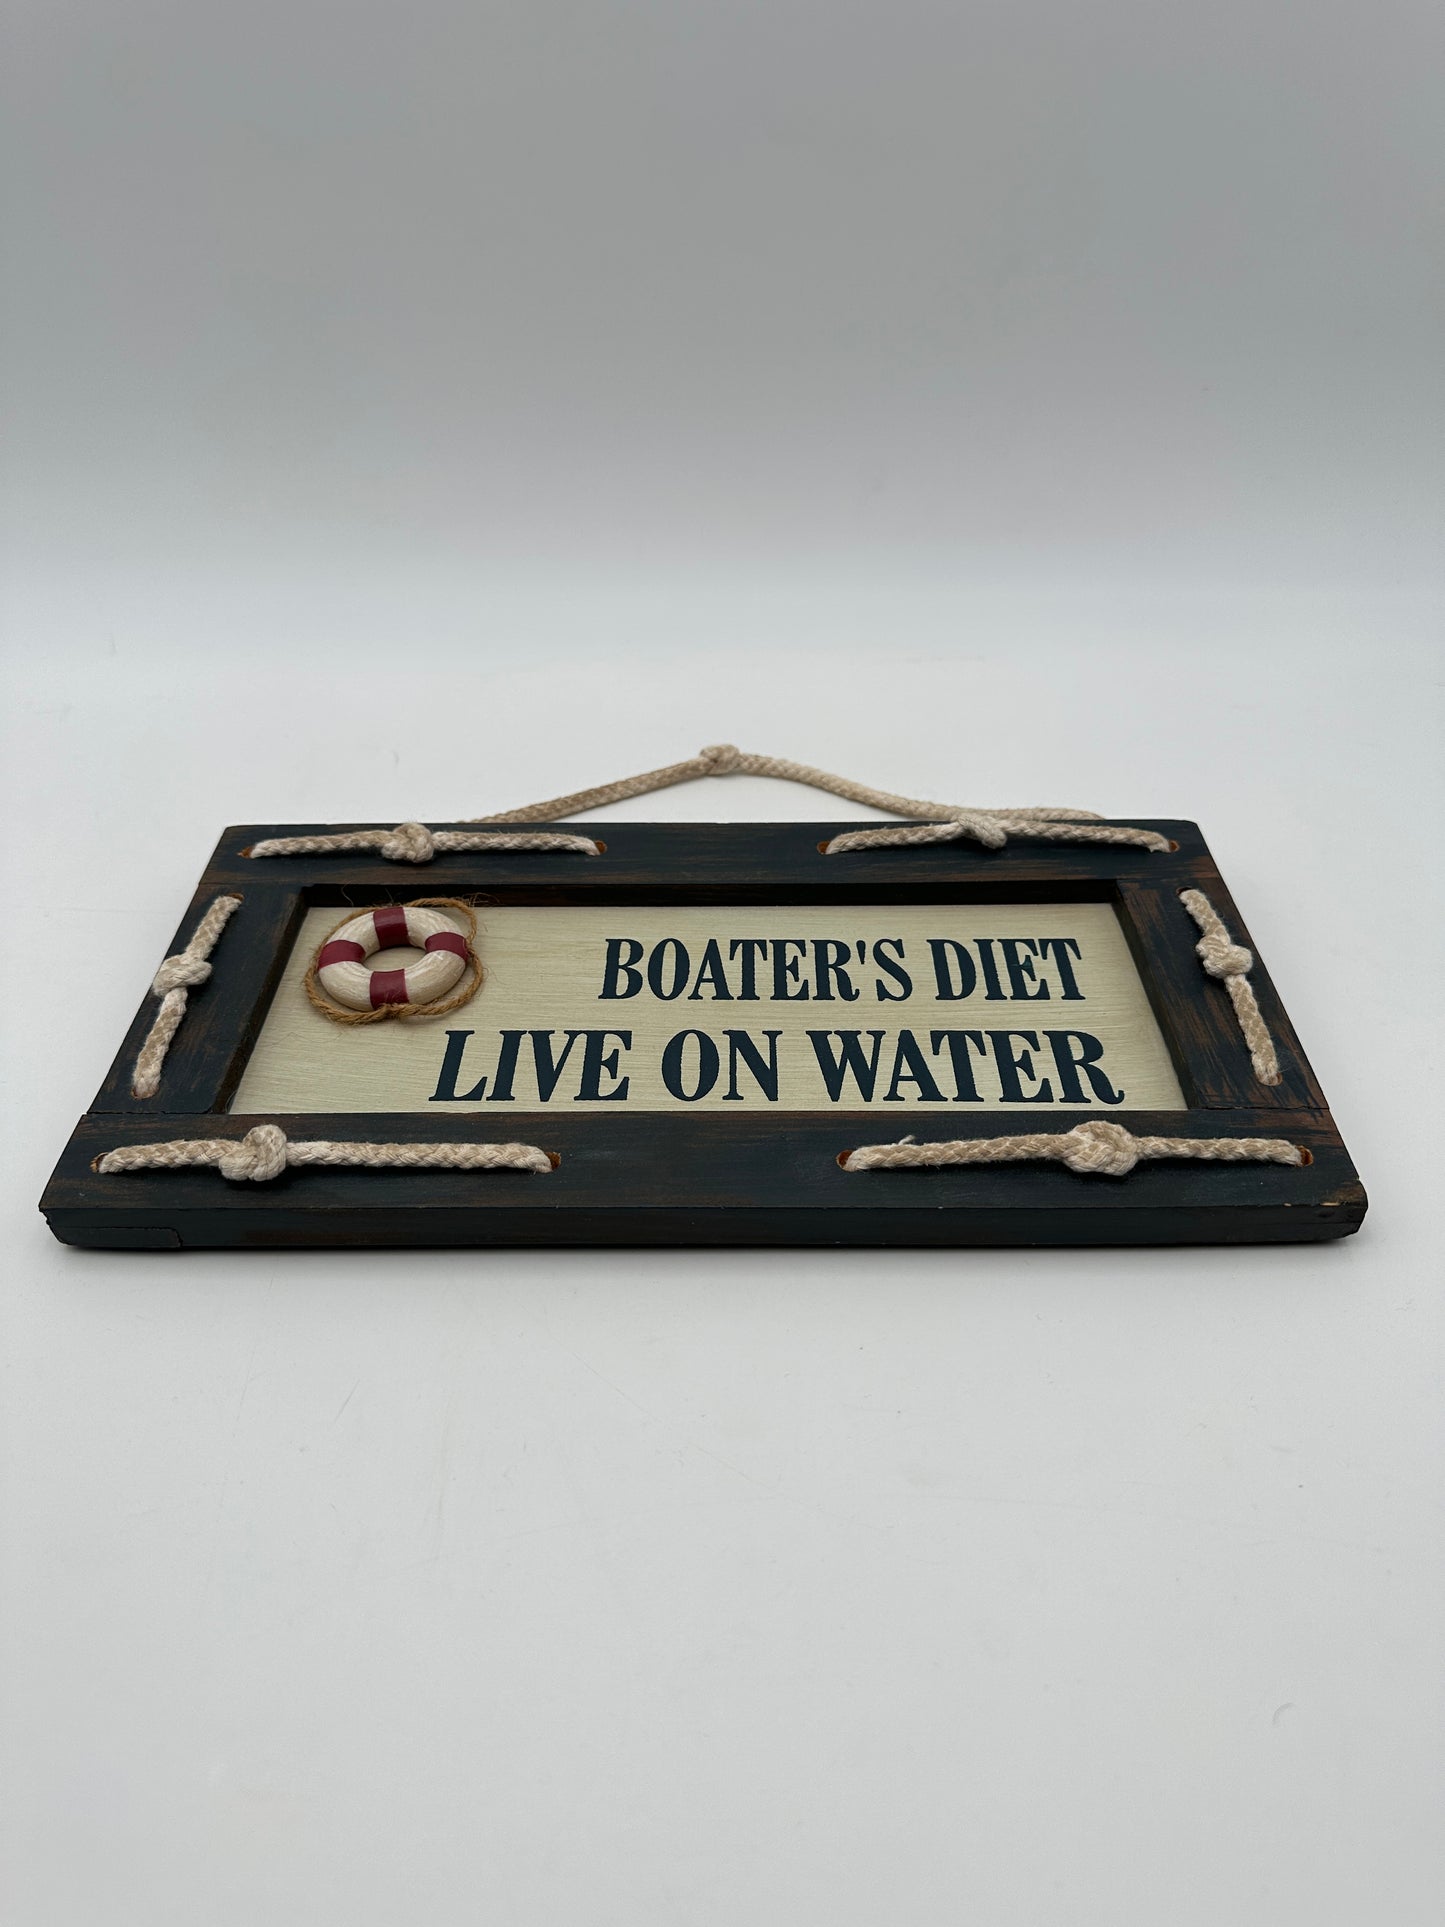 Blue Decorative Wall Plaque "Boater's Diet Live on Water"